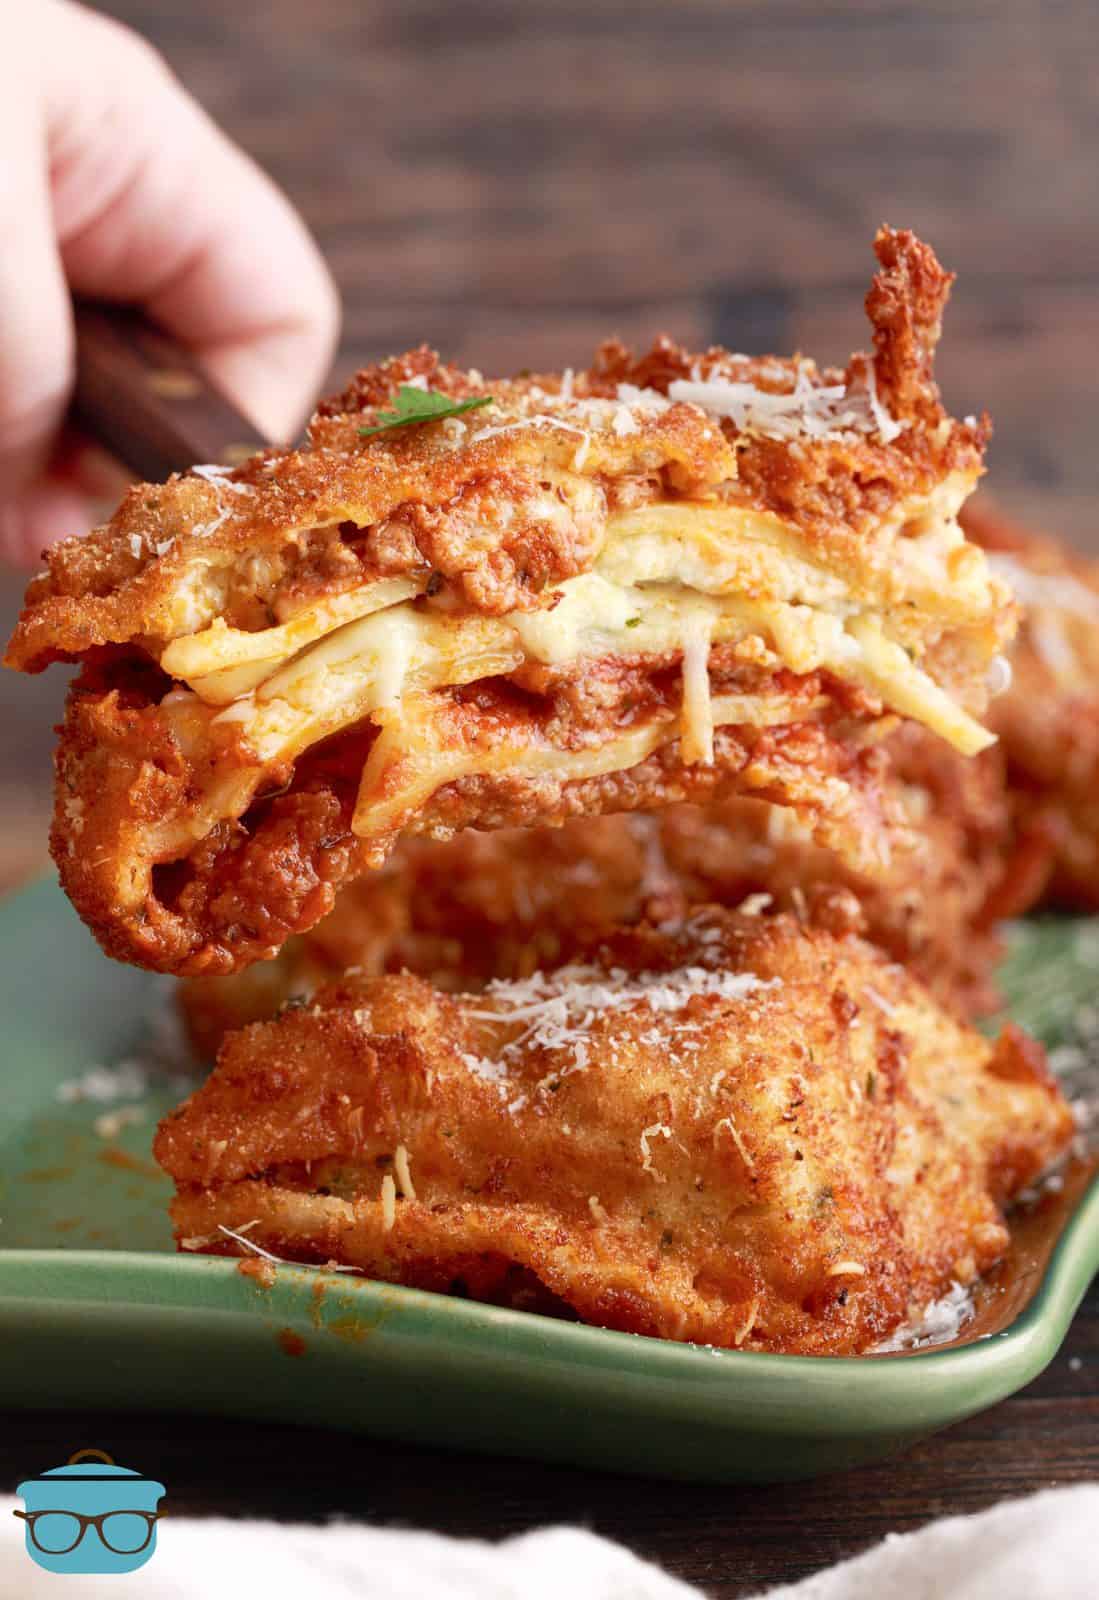 Spatula holding up a piece of Deep Fried Lasagna split in half showing middle.